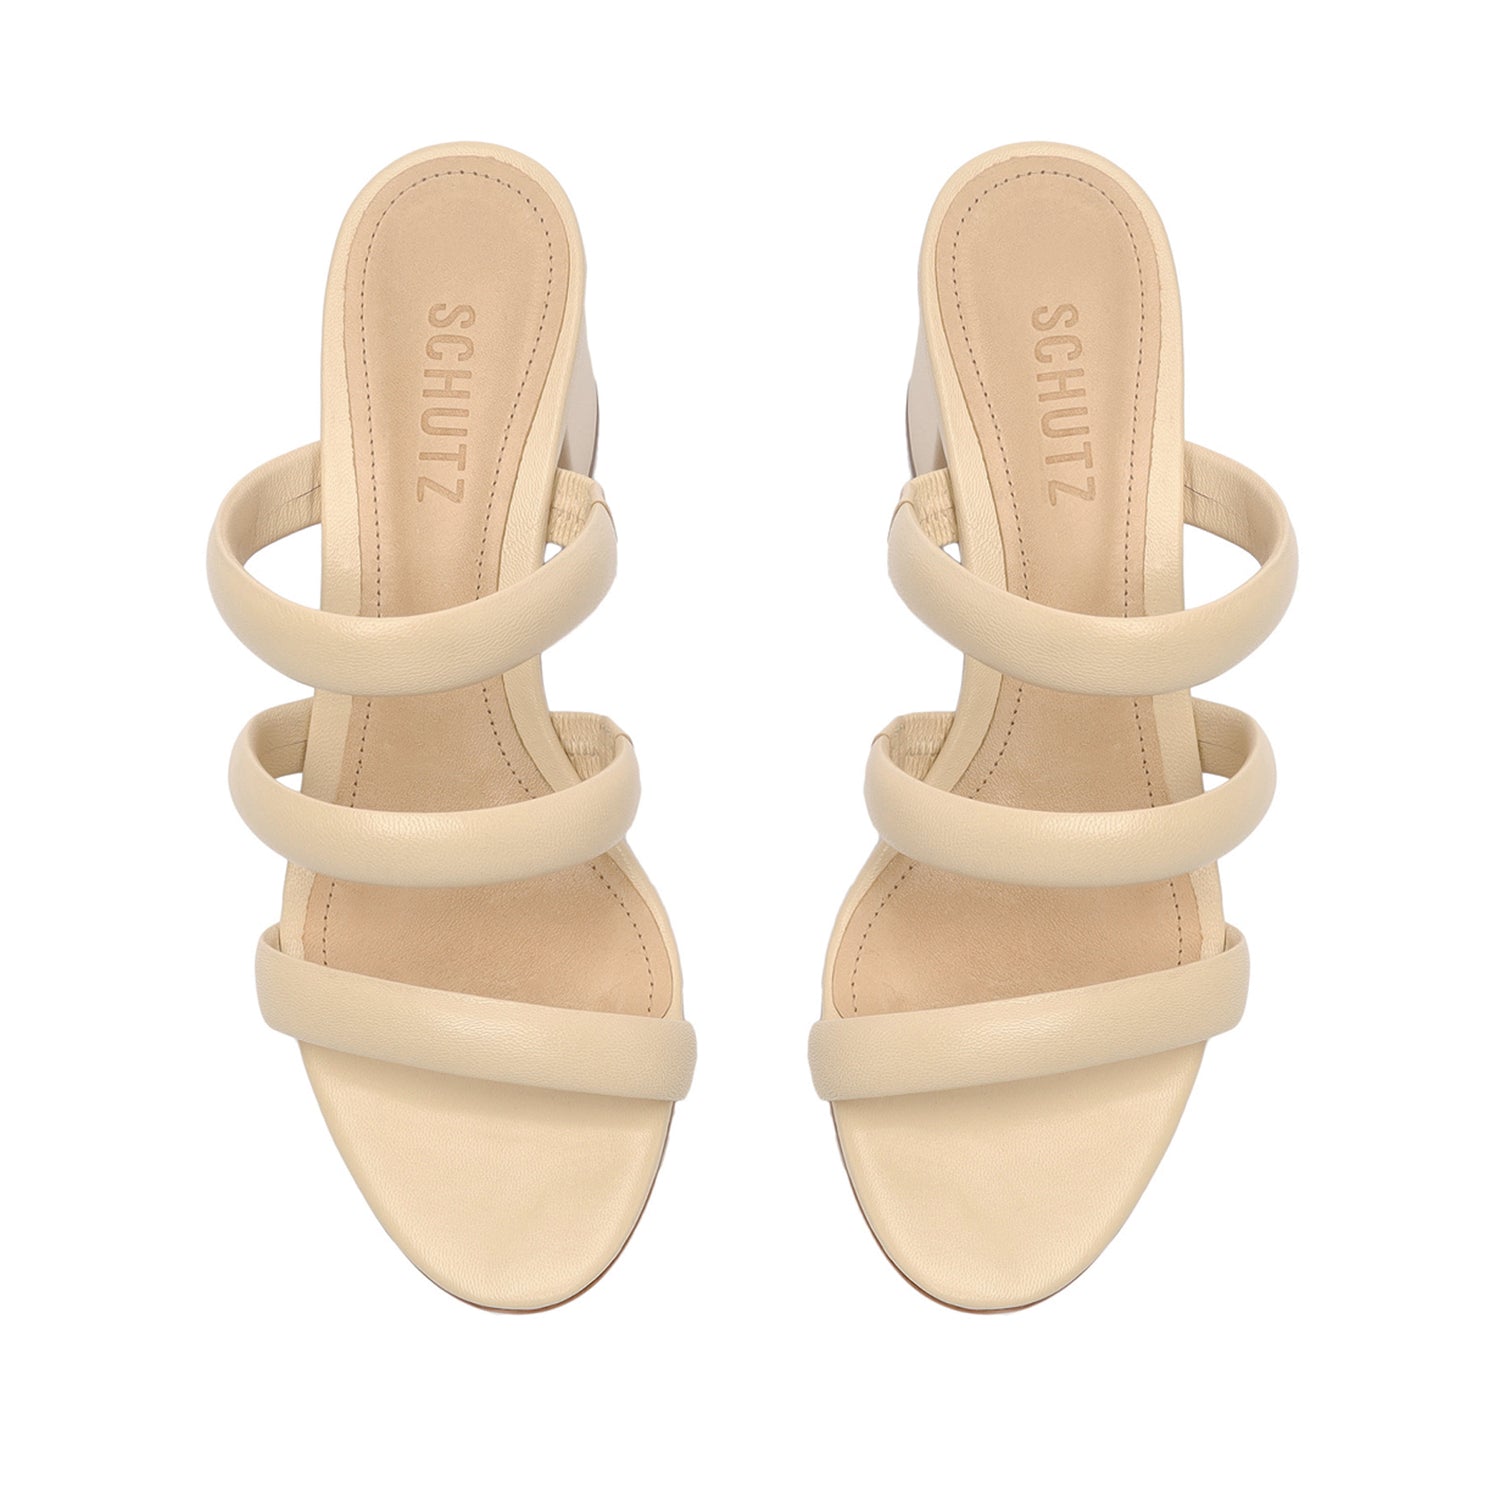 Olly Mid Block Nappa Leather Sandal Eggshell Nappa Leather